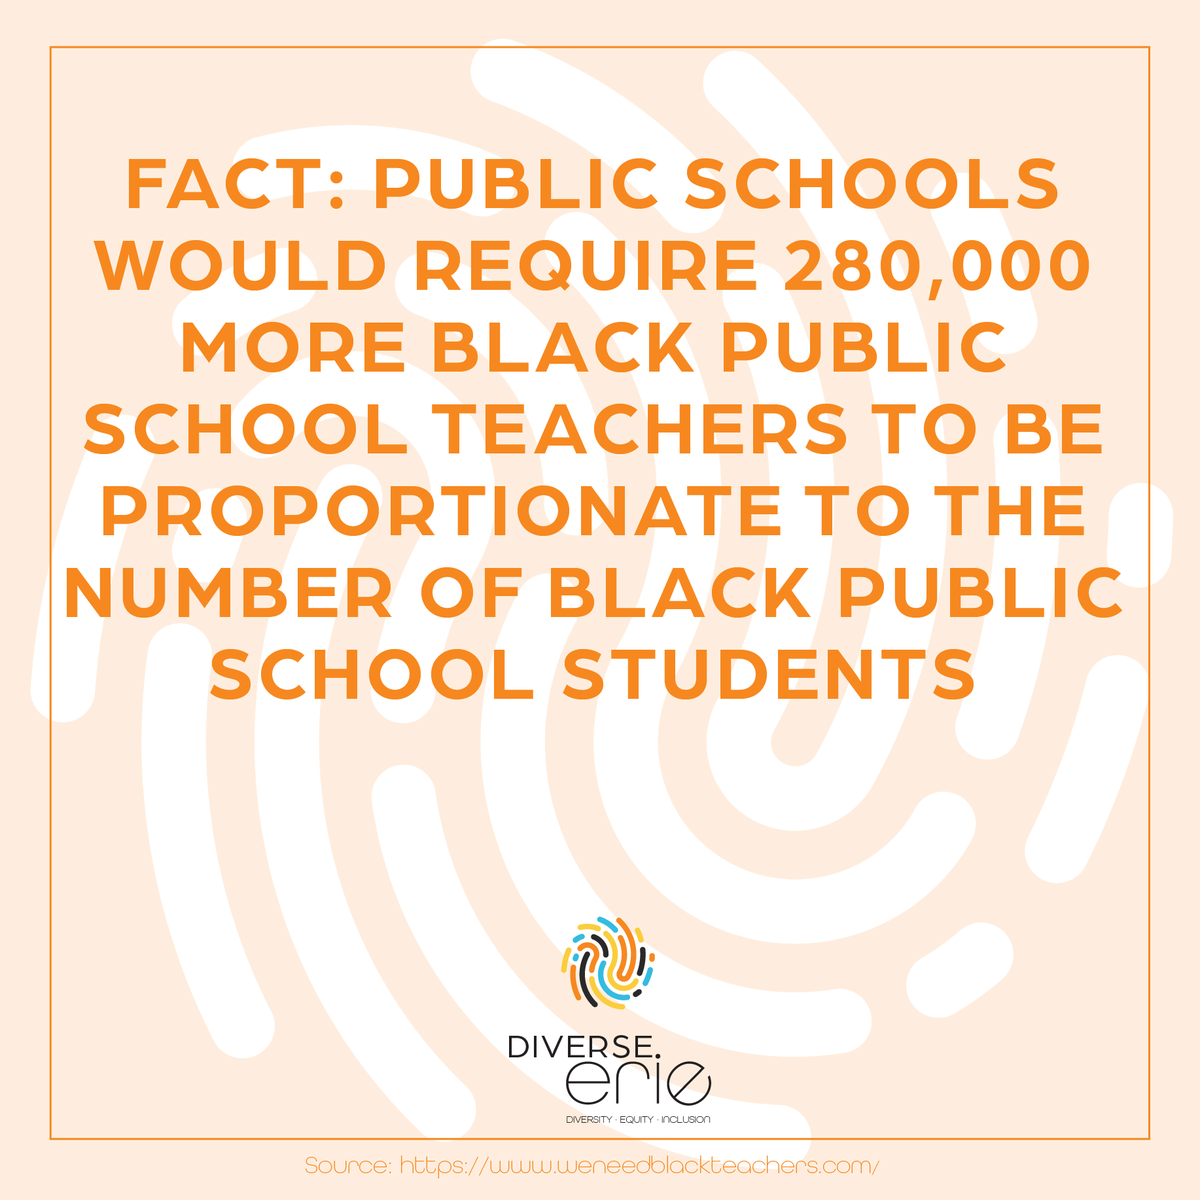 More Black teachers would help close the opportunity and achievement gaps that still face many Black students today. It is time our educators look like our students.

Join the #DiverseErie conversation! #TeacherAppreciationWeek #DEI